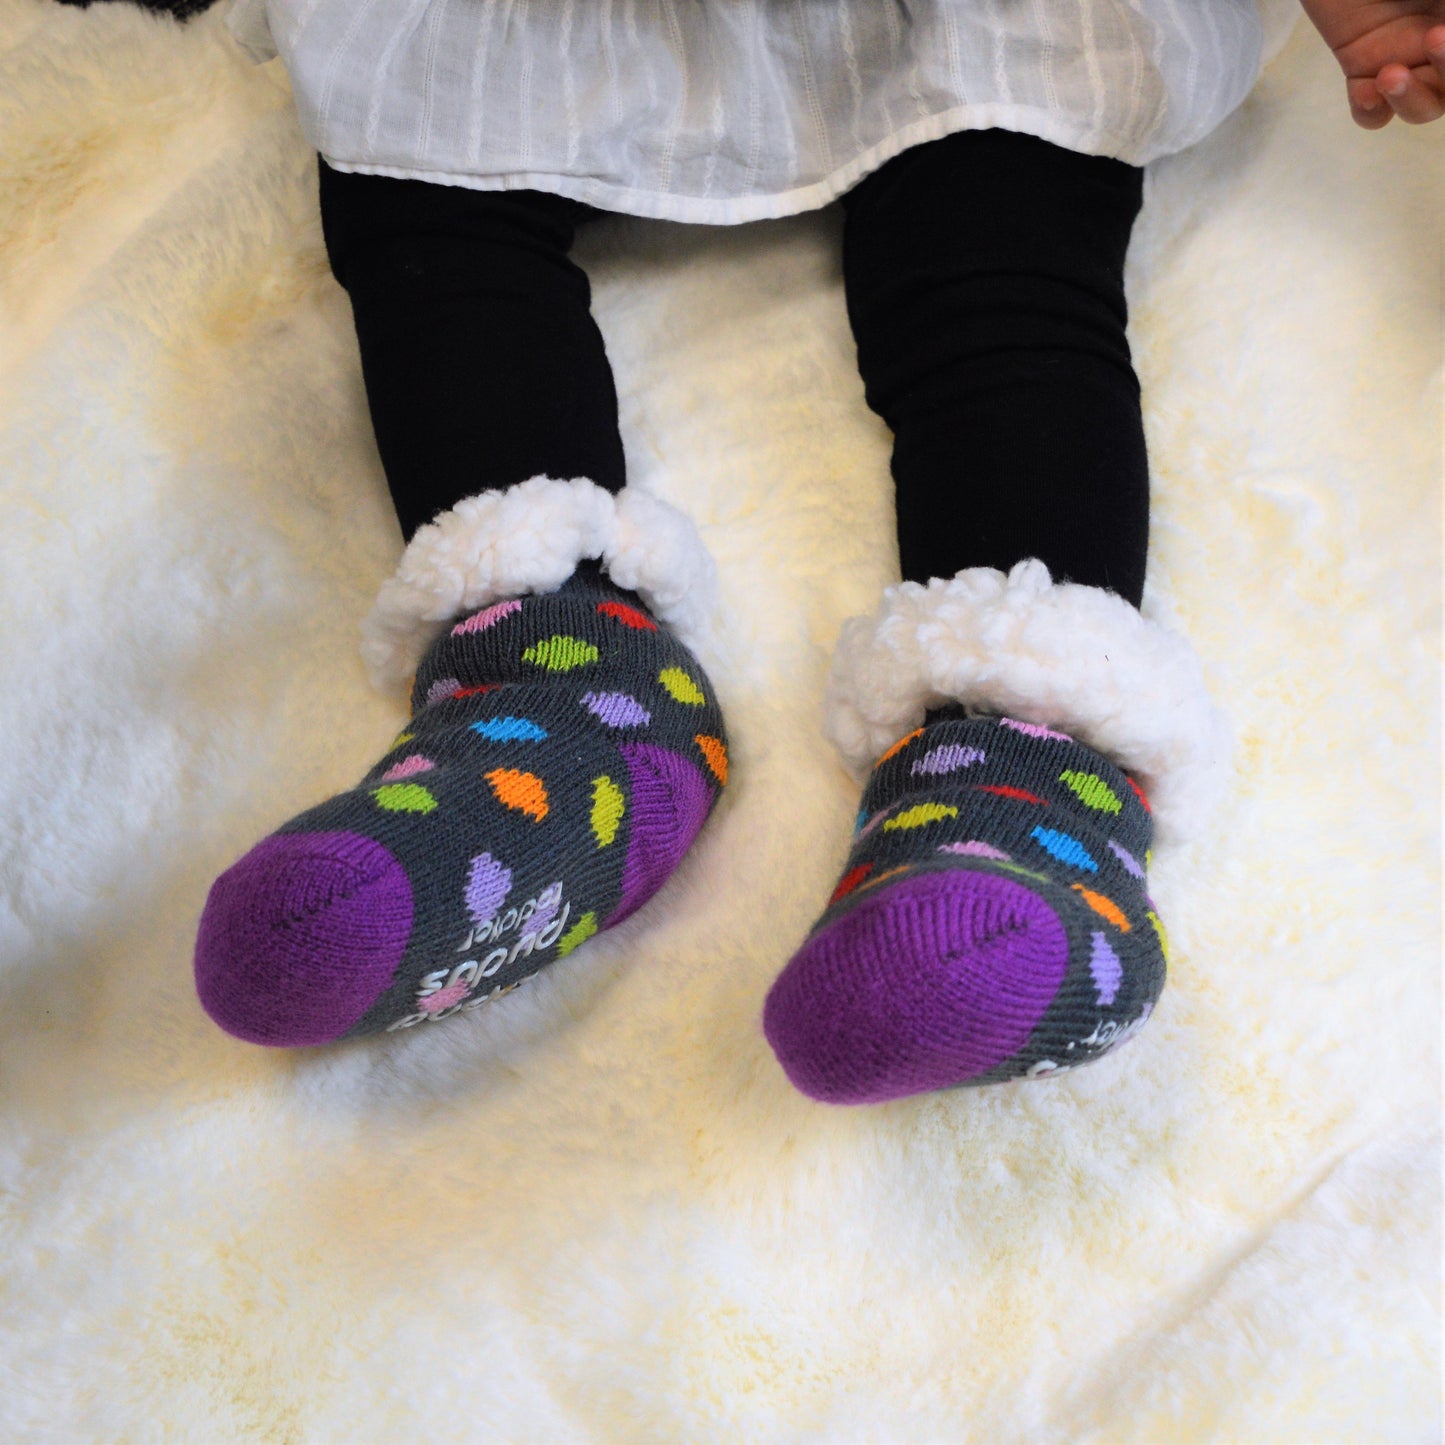 Pudus Cozy Winter Slipper Socks for Toddlers with Non-Slip Grippers and Faux Fur Sherpa Fleece - Baby Boy and Girl Fuzzy Socks (Ages 1-3) Polka Dot Multi - Toddler Slipper Socks